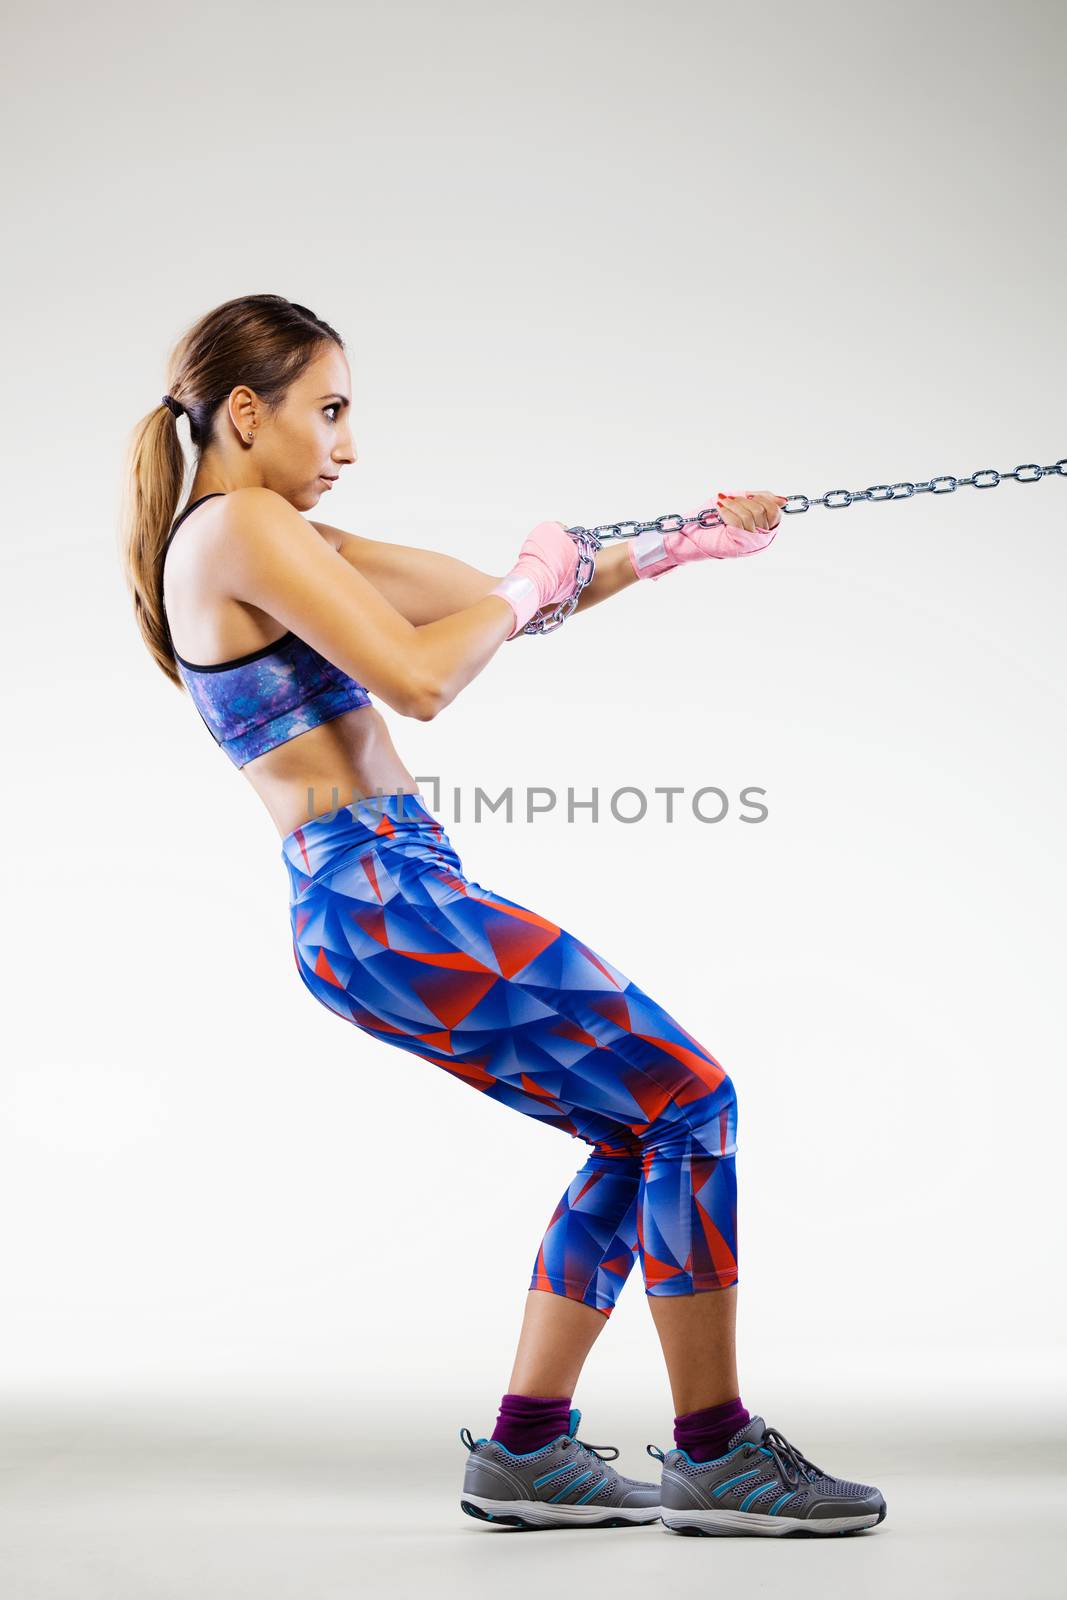 girl kickboxer pulling a chain with pink hand wraps